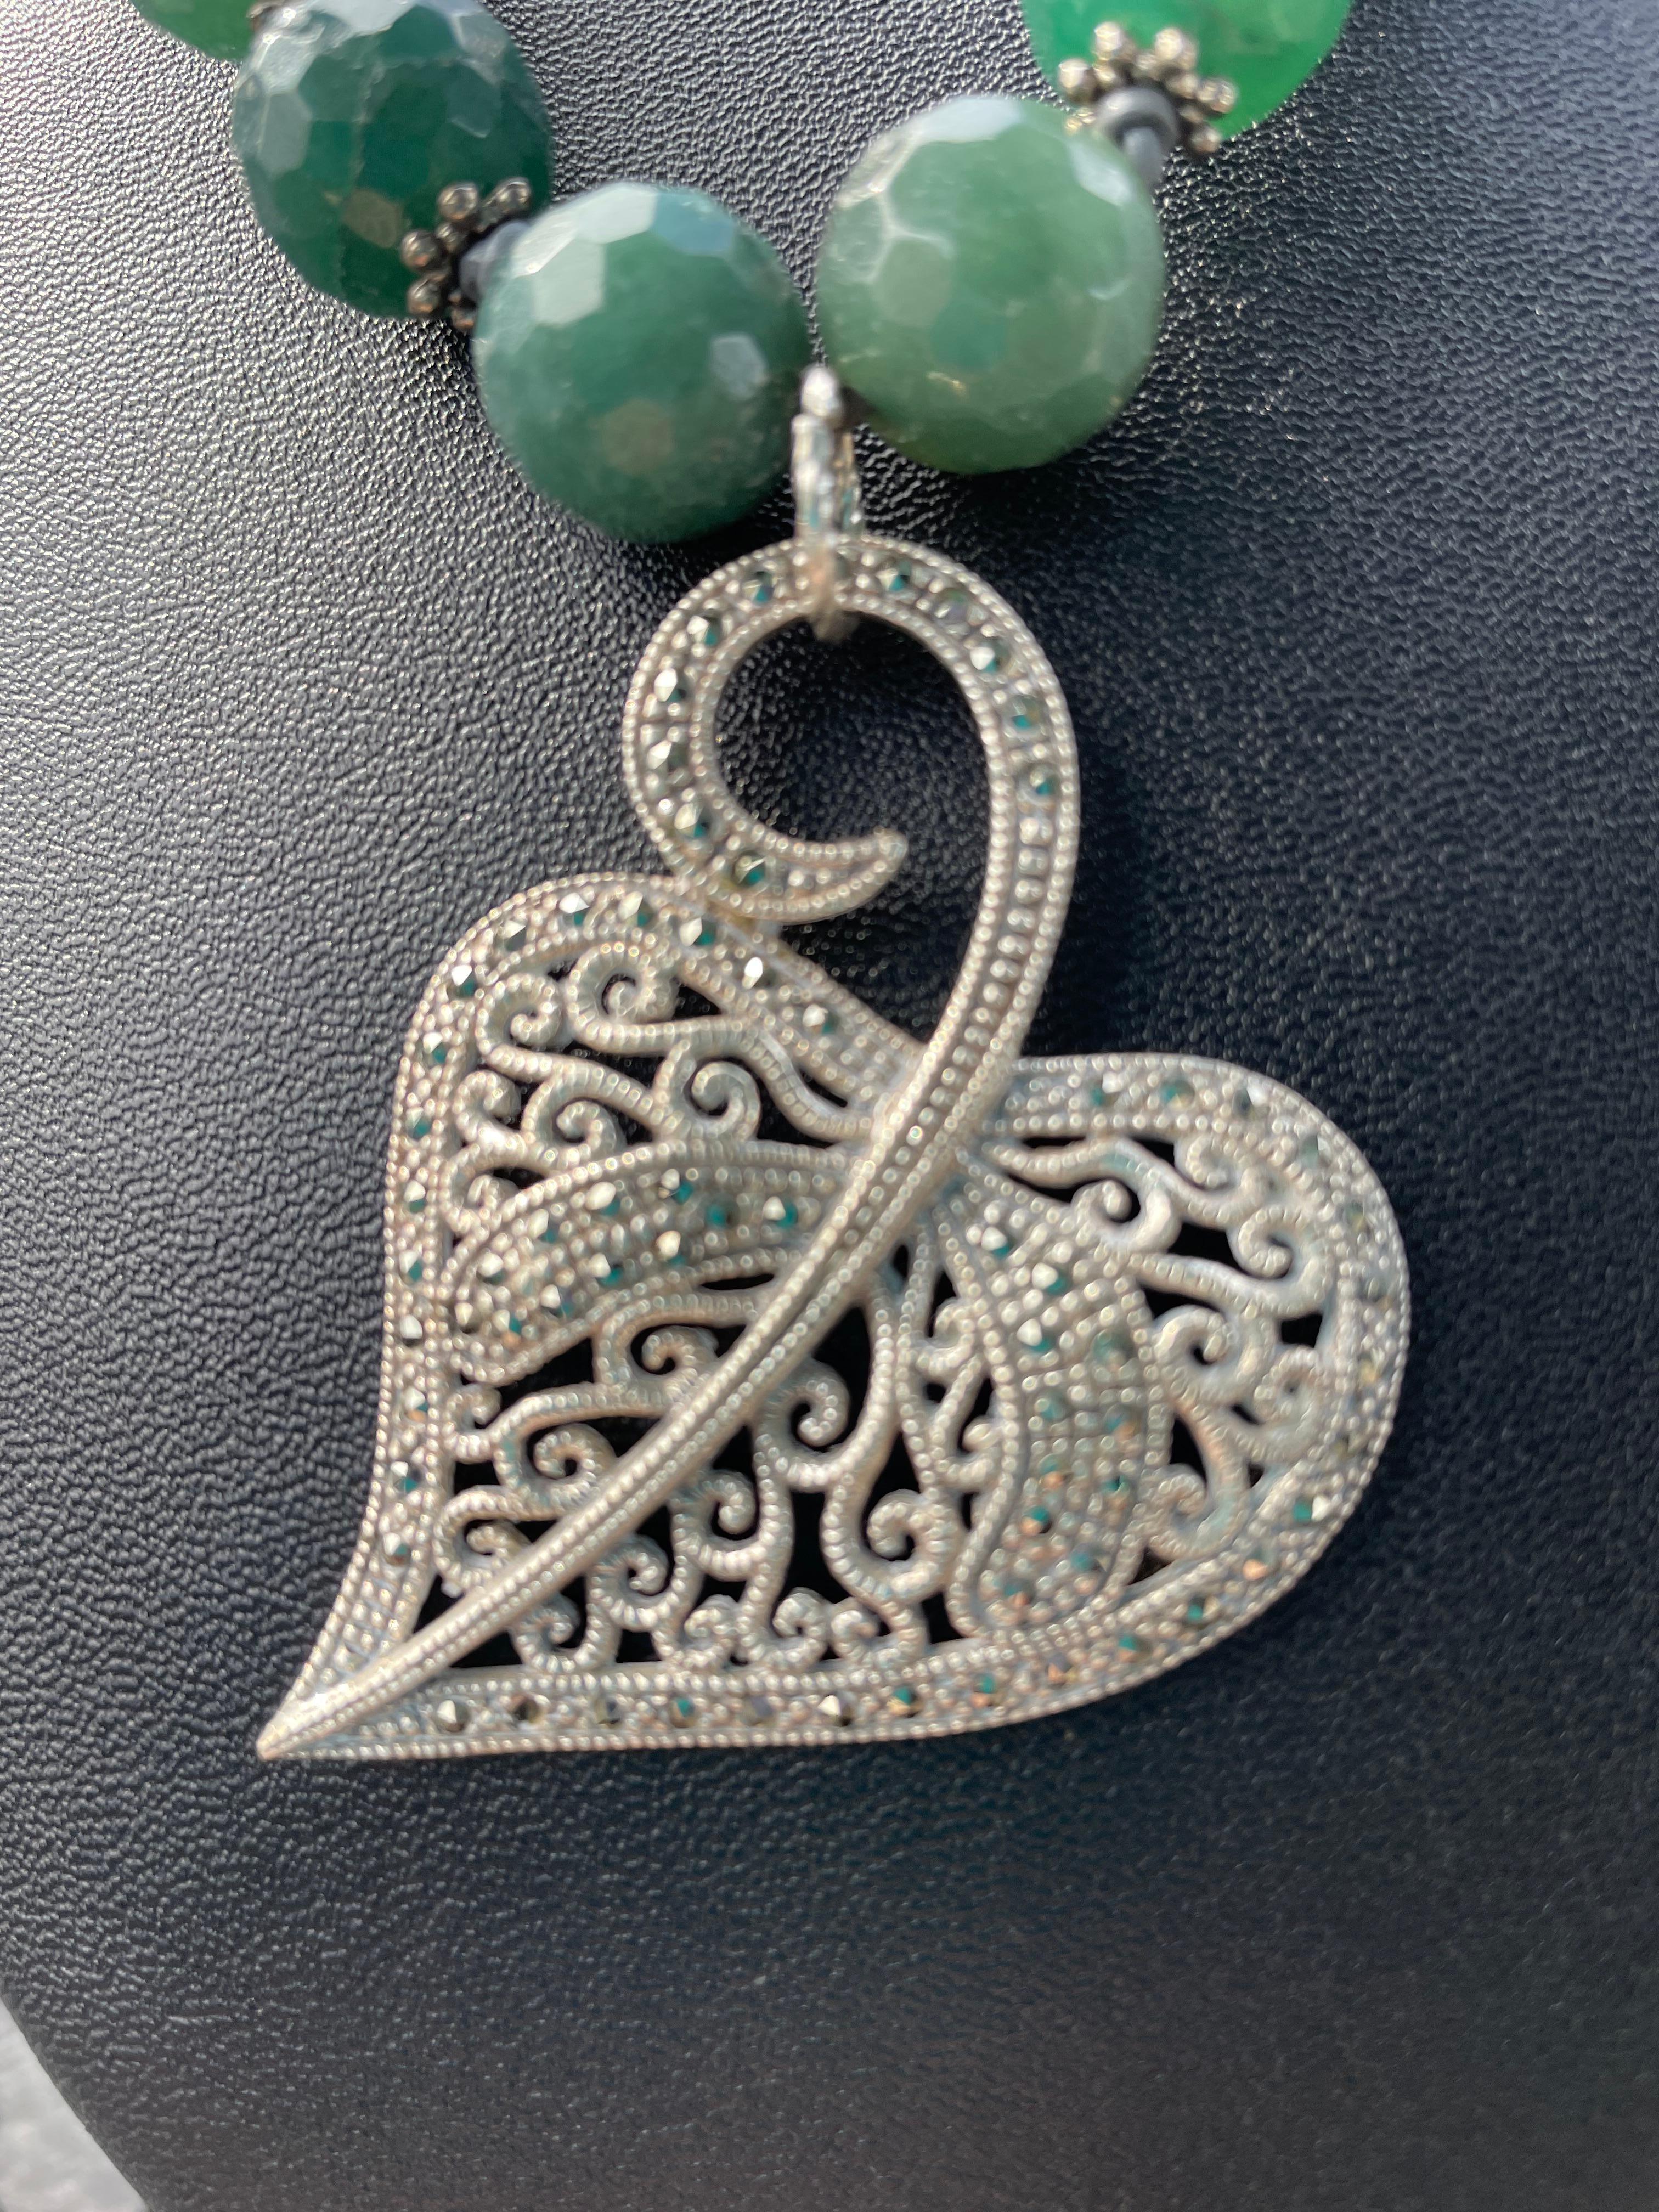 Lorraine’s Bijoux offers a Vintage Sterling Silver and Marcasite Leaf Brooch pendant with vintage glass rose bud and leaf sections, green faceted crystals, vintage AB crystals, crystal inlaid black beads, on a hand braided cotton cord. This piece is